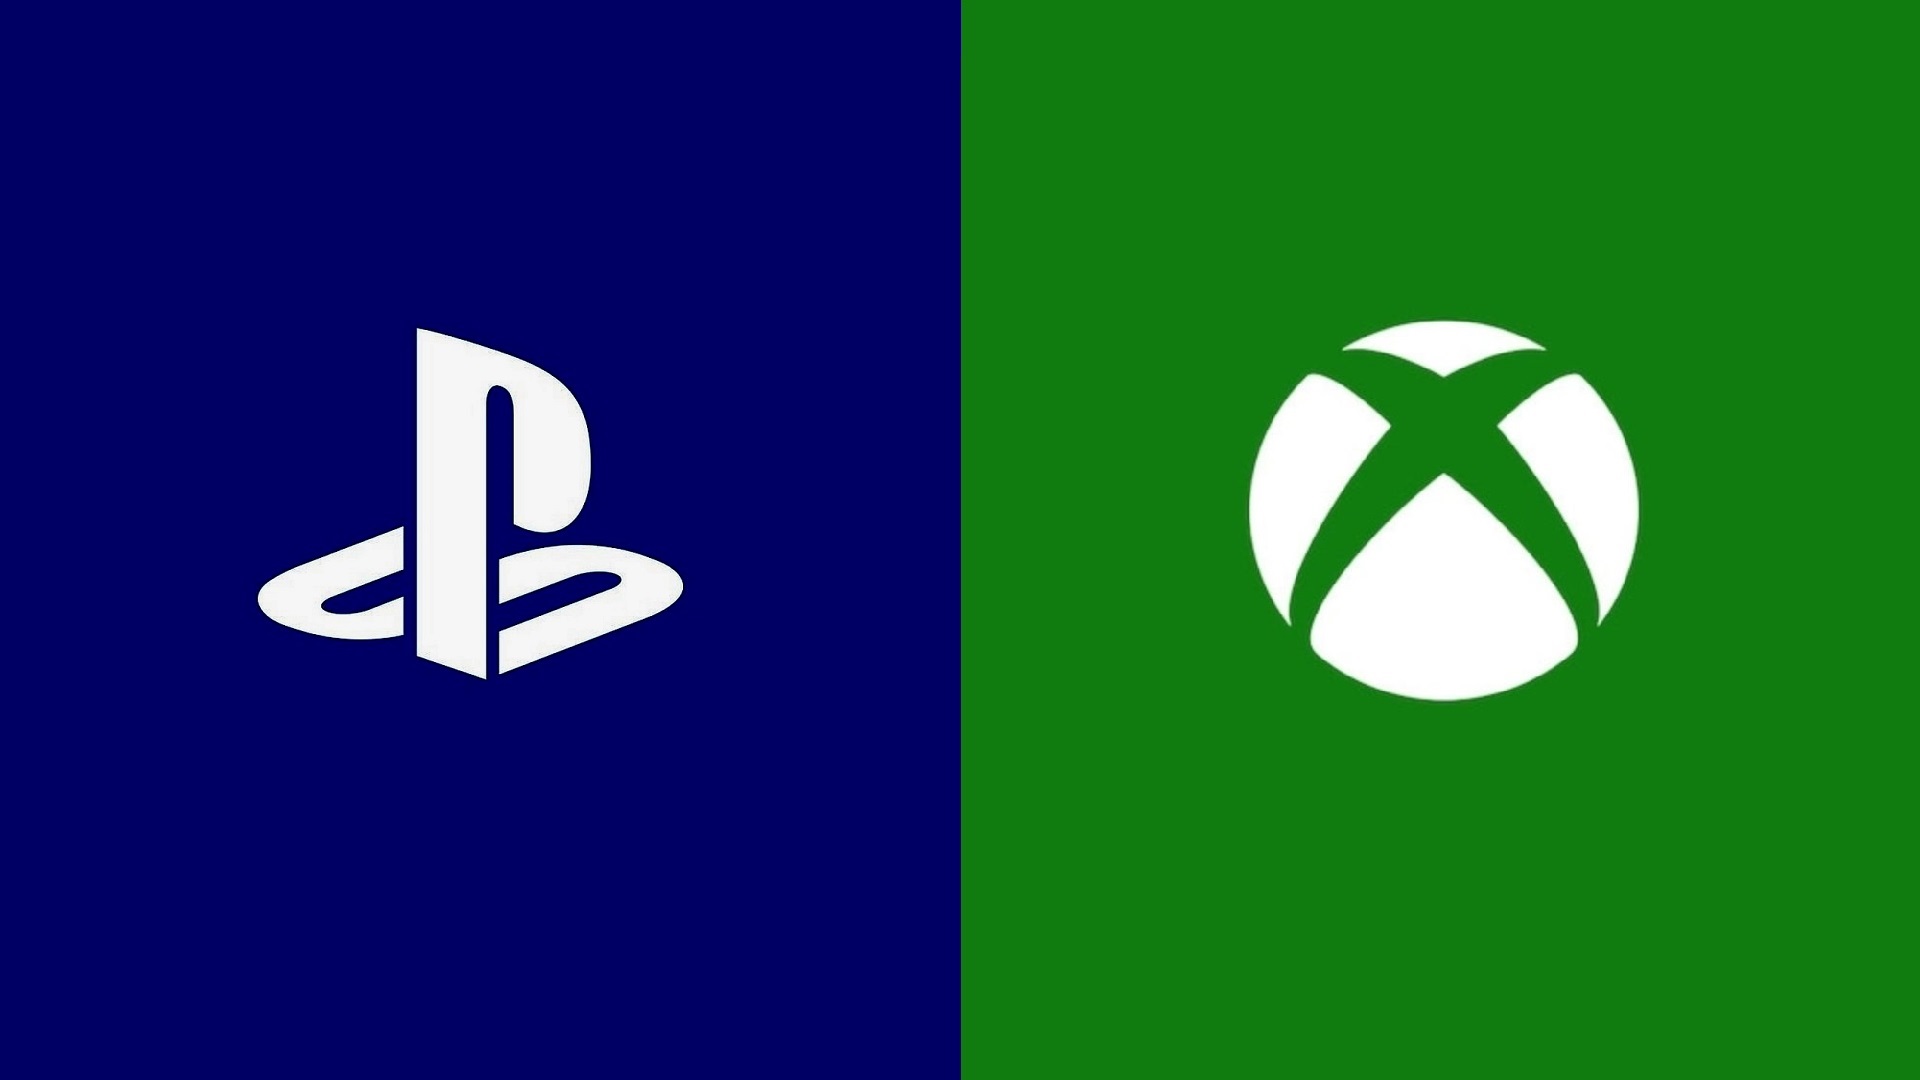 Microsoft Expects Next Console Generation to Start in 2028